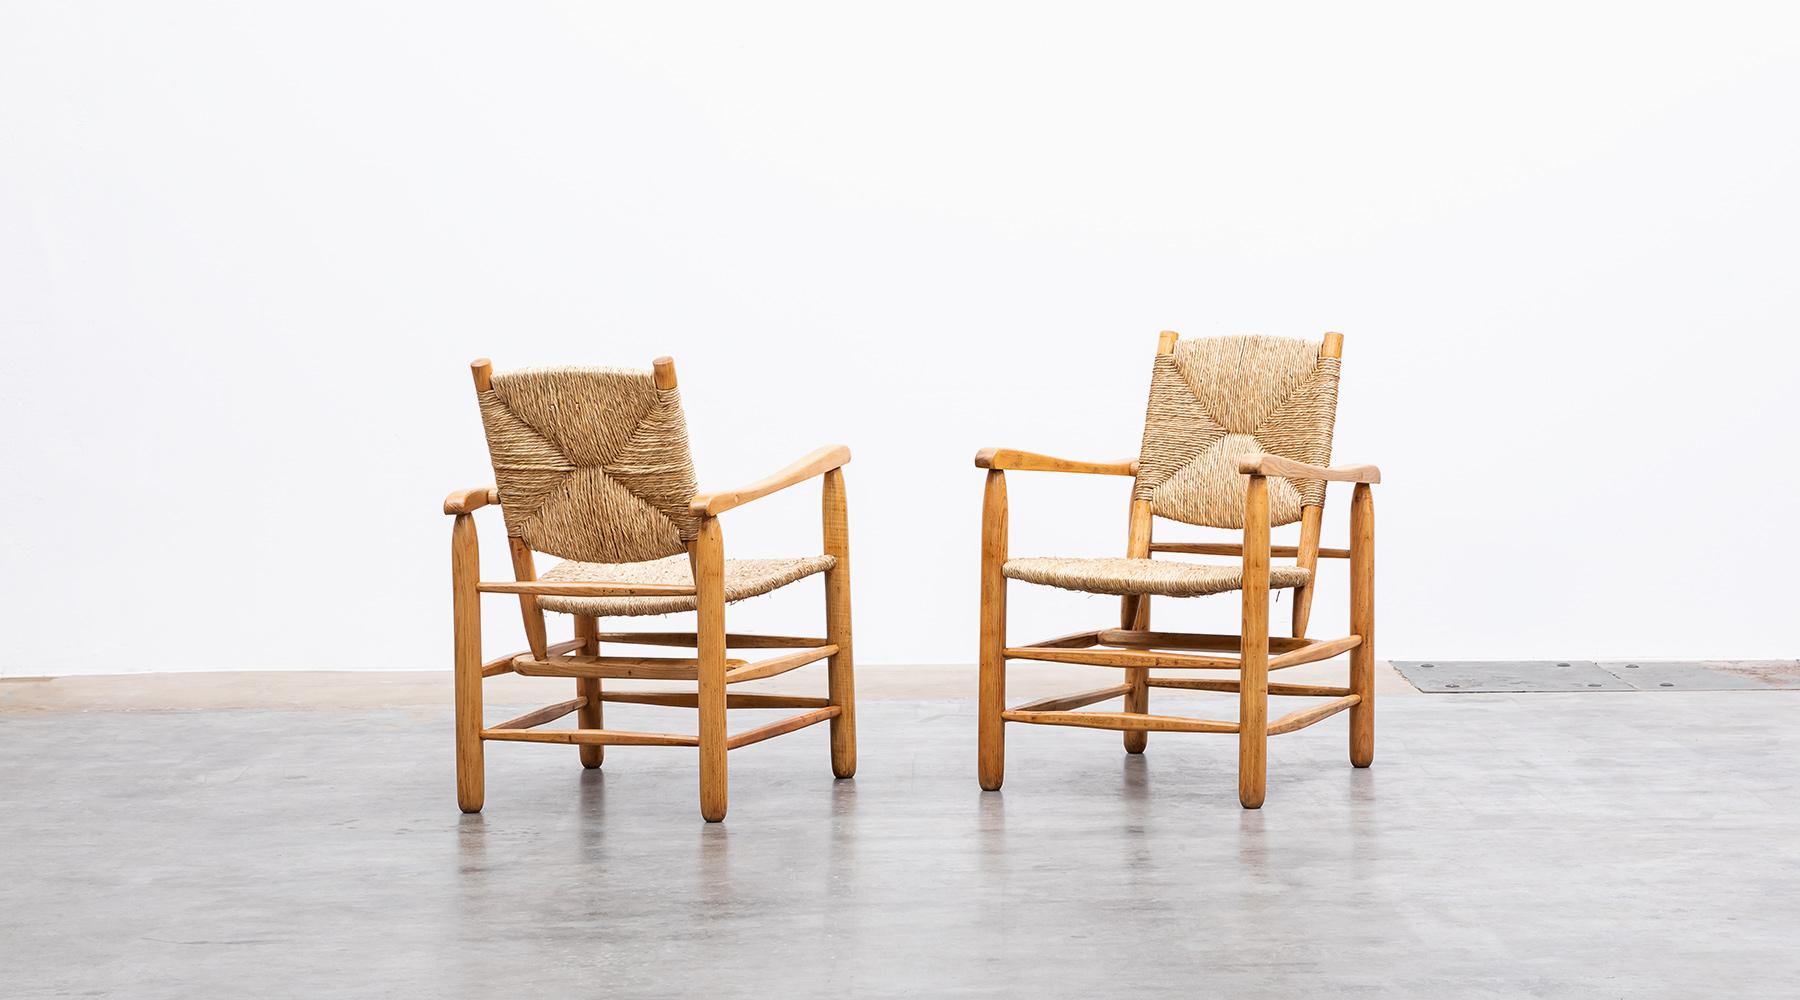 Lounge chair, oak, rush by Charlotte Perriand for L' Equipement de la Maison, France, 1947.

Astonishingly unconventional shape, a matching pair of Lounge Chairs by famous French Charlotte Perriand. Very good original condition in oak and rush.